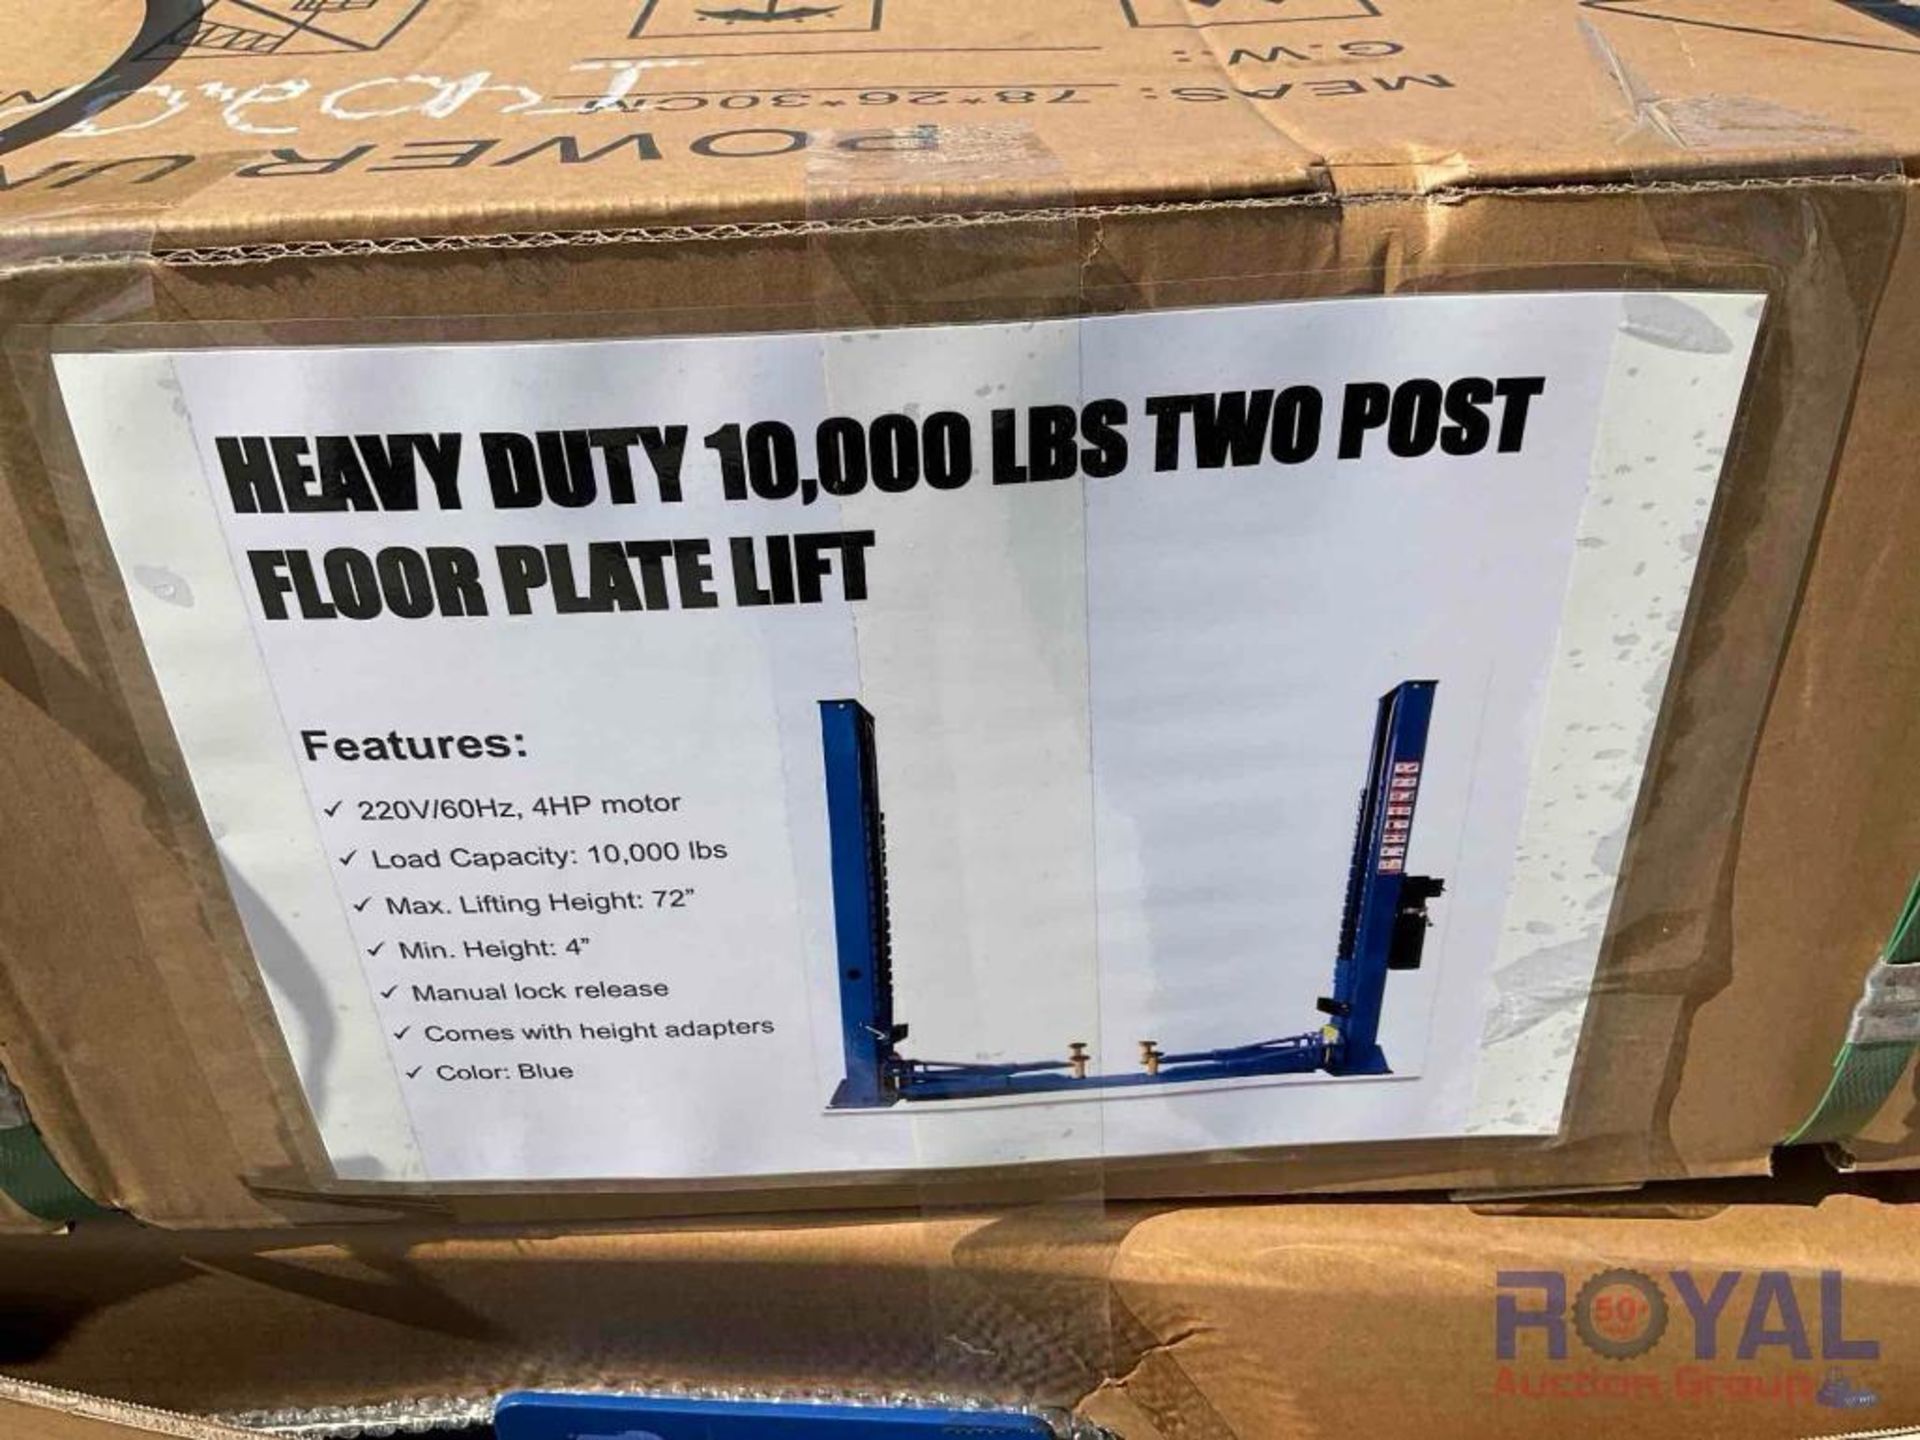 2024 Heavy Duty 10000lbs Two Post Floor Plate Auto Lift - Image 5 of 5